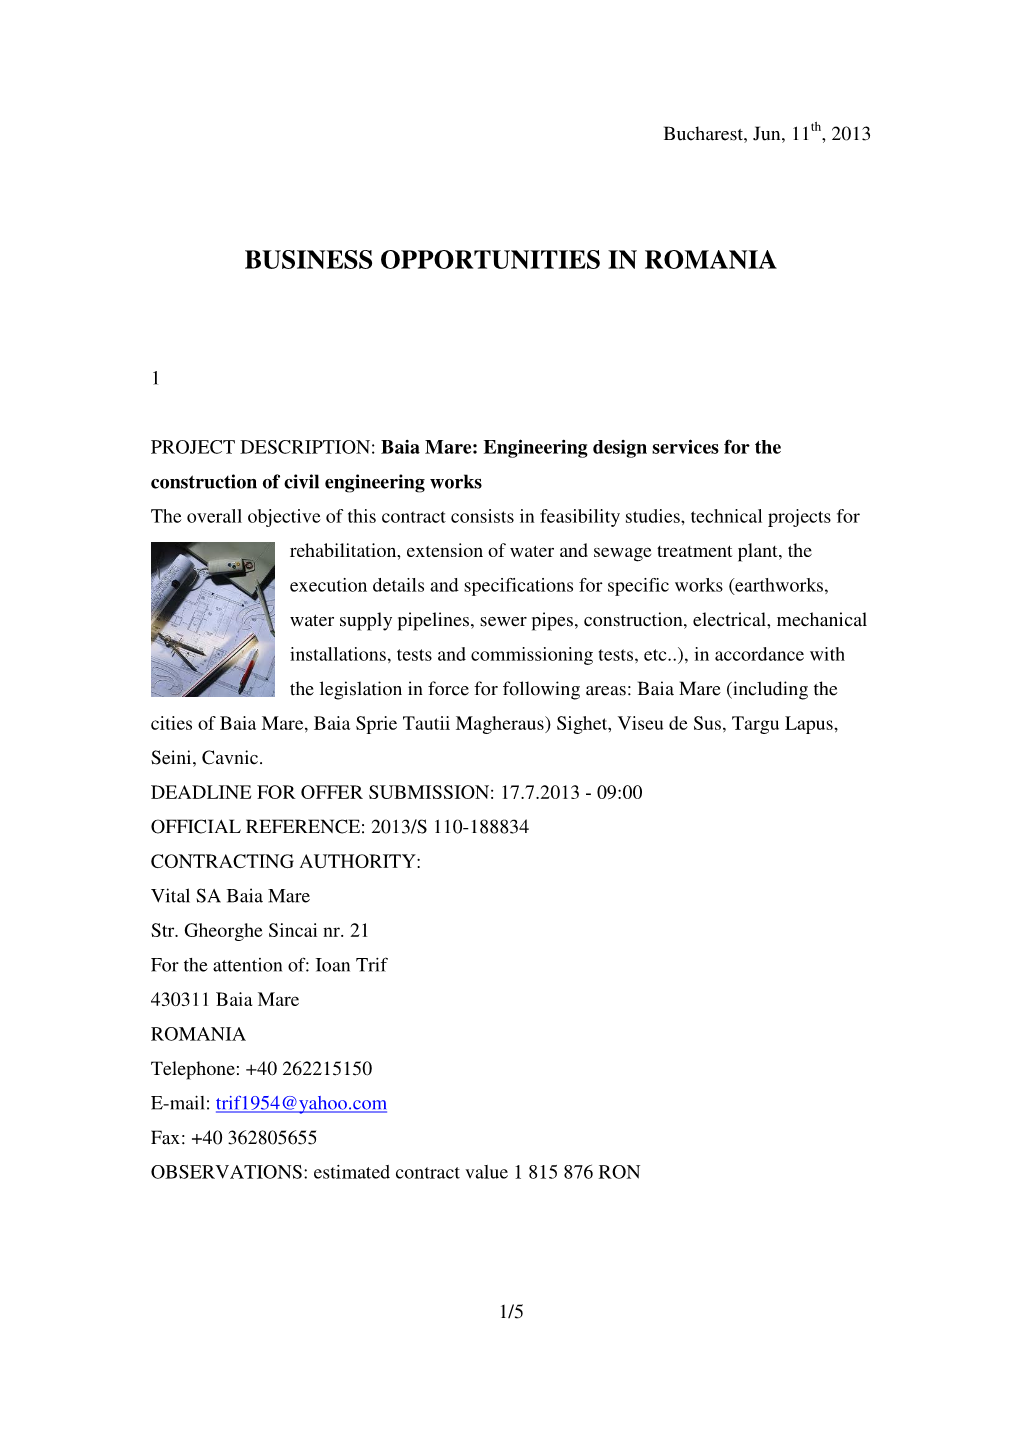 Business Opportunities in Romania